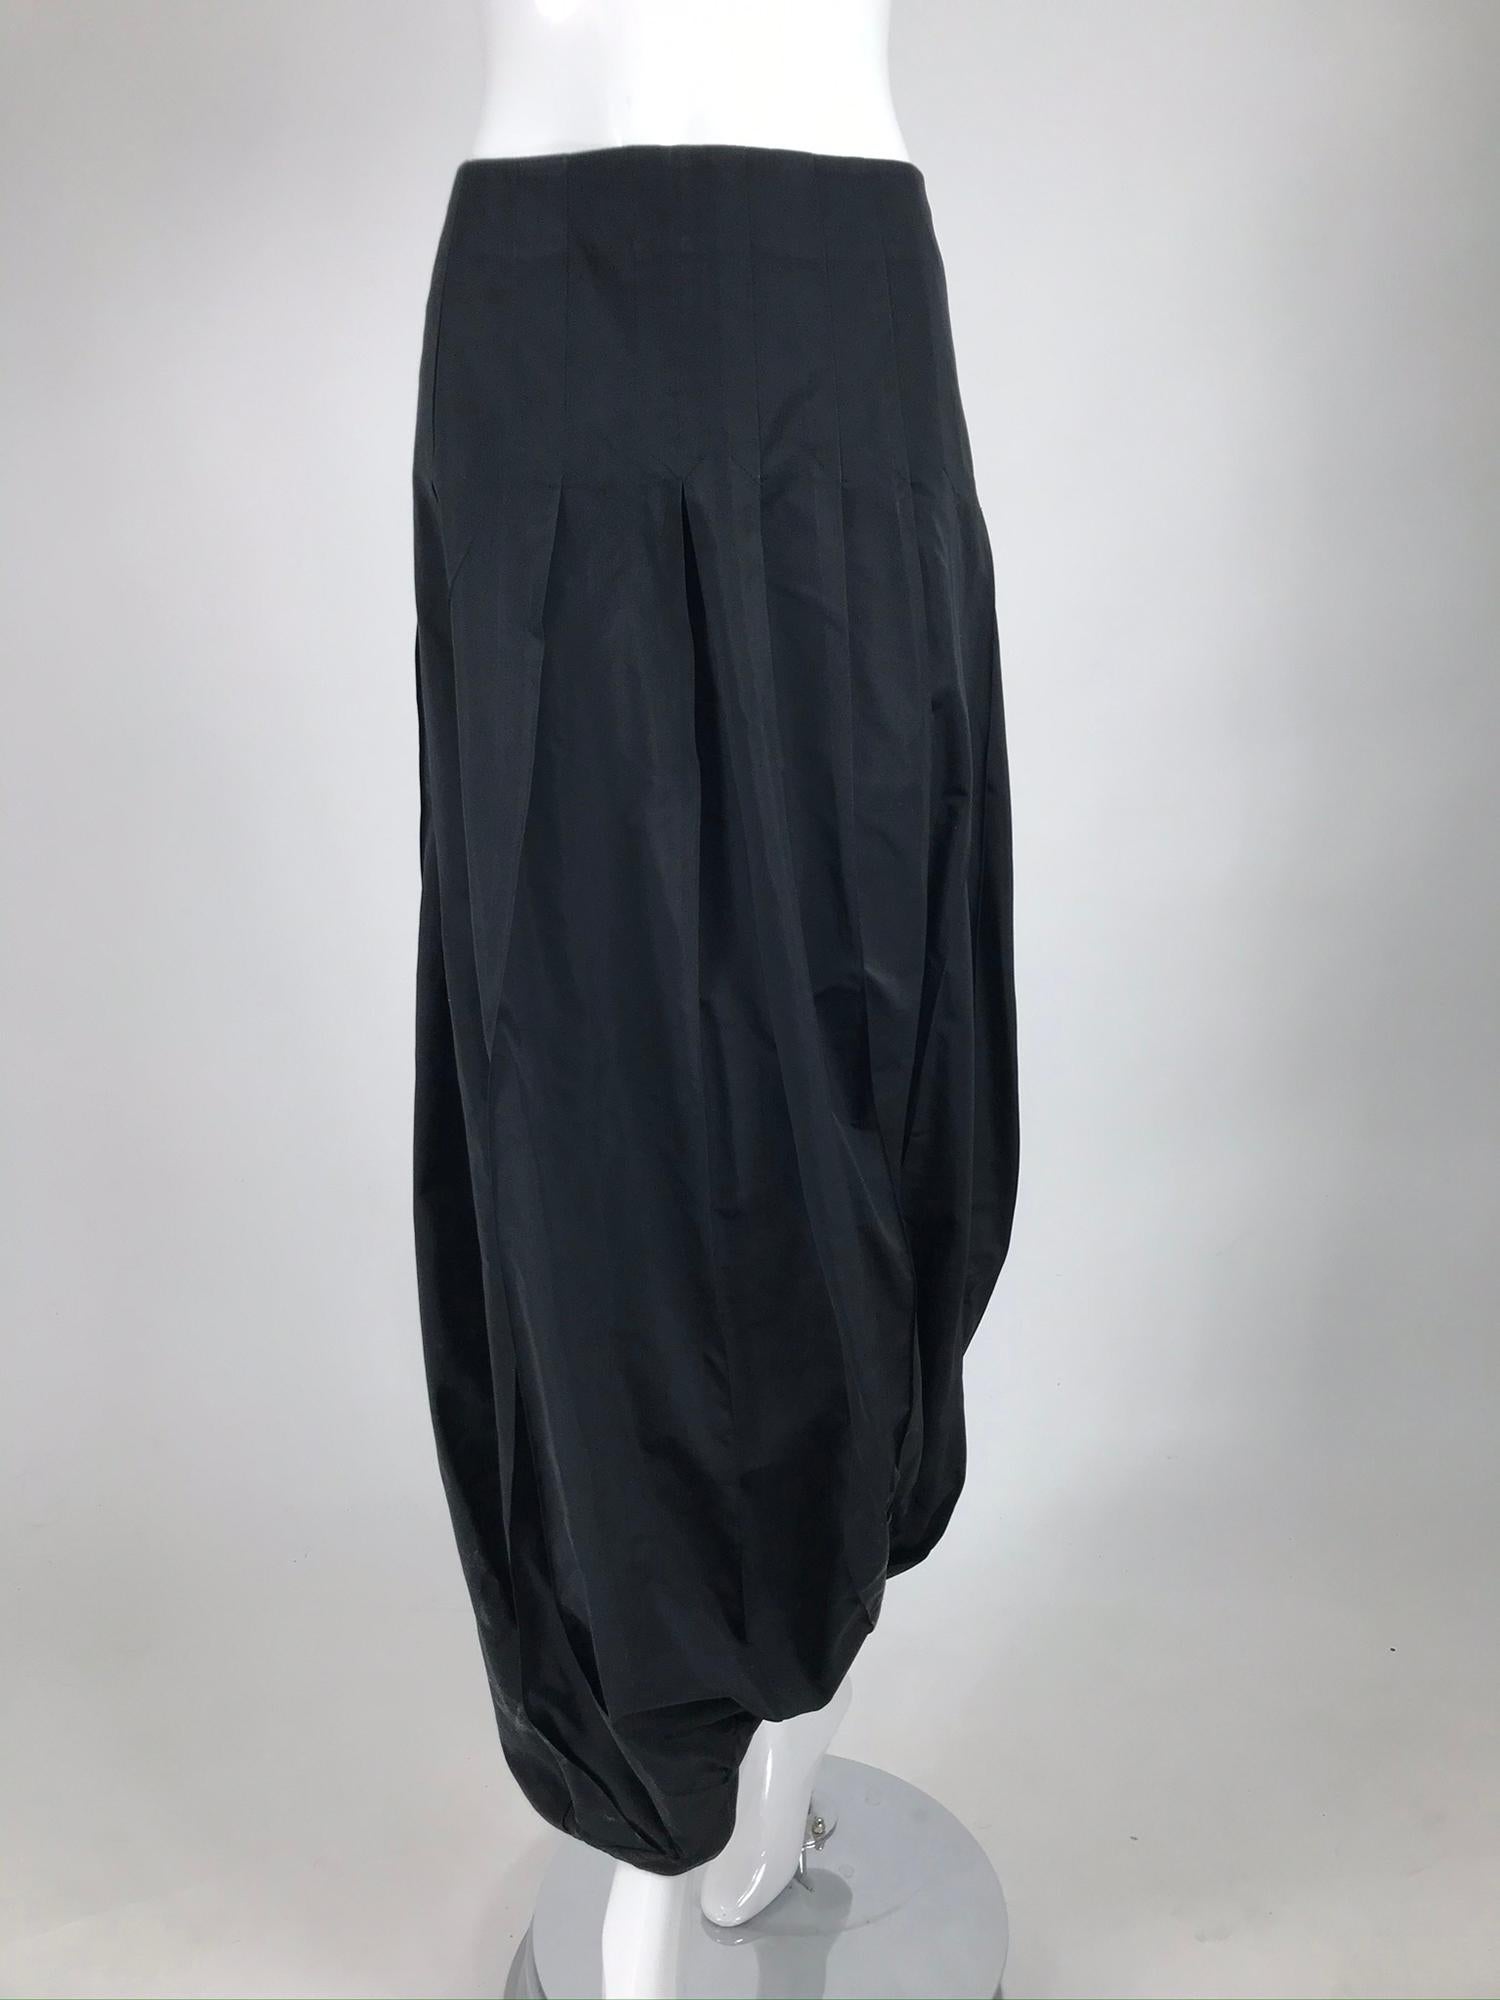 Kenzo zouave trouser in black taffeta from the late 1980s. Matte black taffeta trouser/skirt is fitted through the waist to the hip via inverted pleats that open full to the hem. The skirt is gathered at the hem into a horizontal center band,